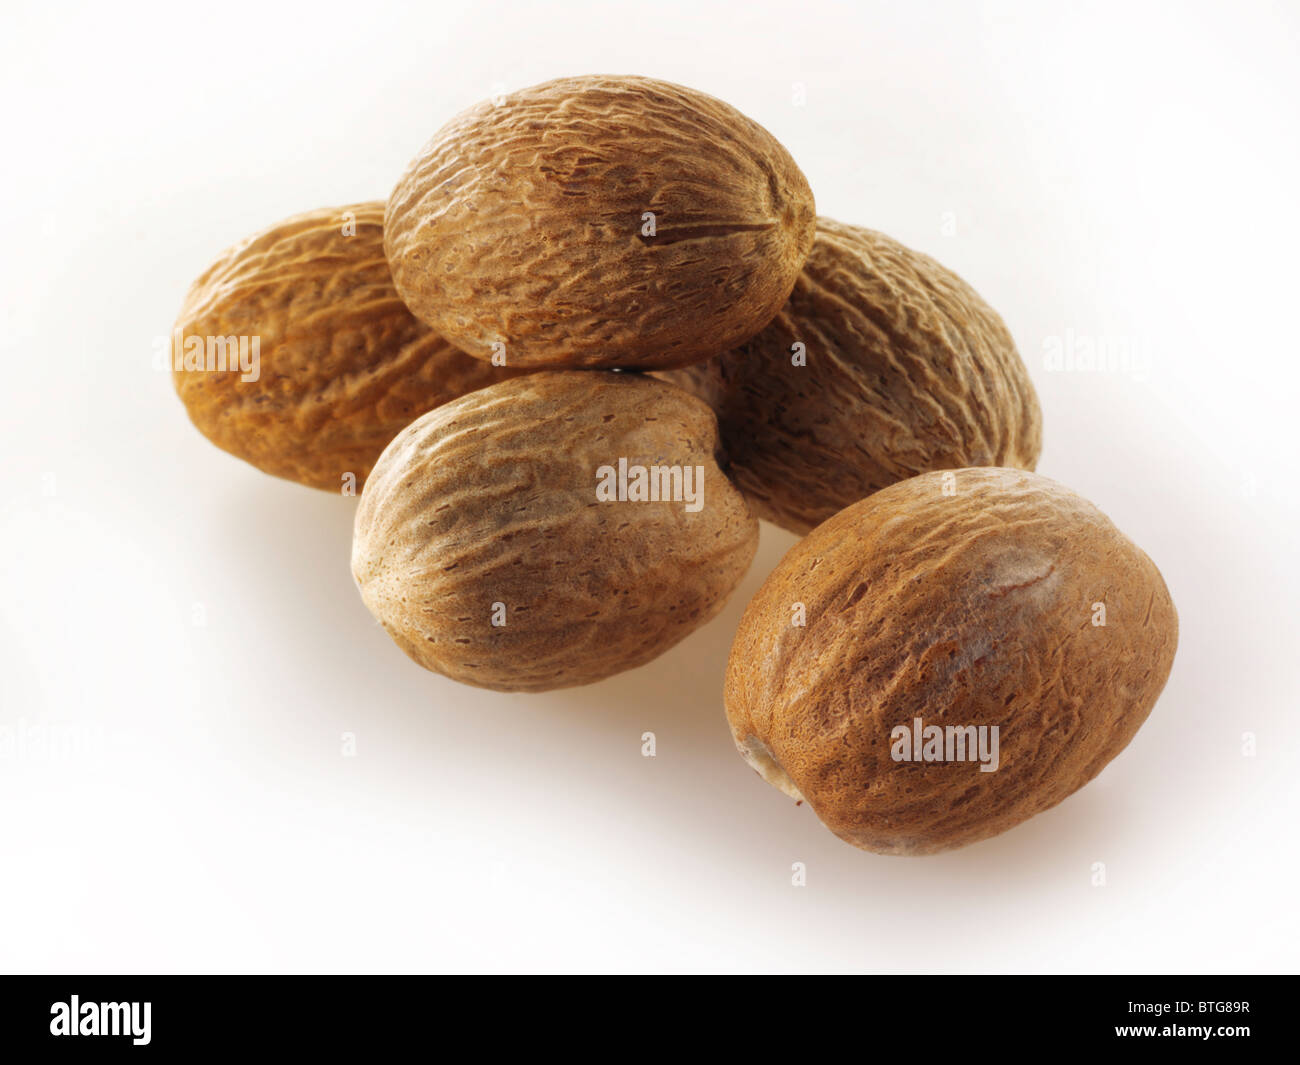 Wole Nutmegs  composed arrangement isolated against a white background Stock Photo